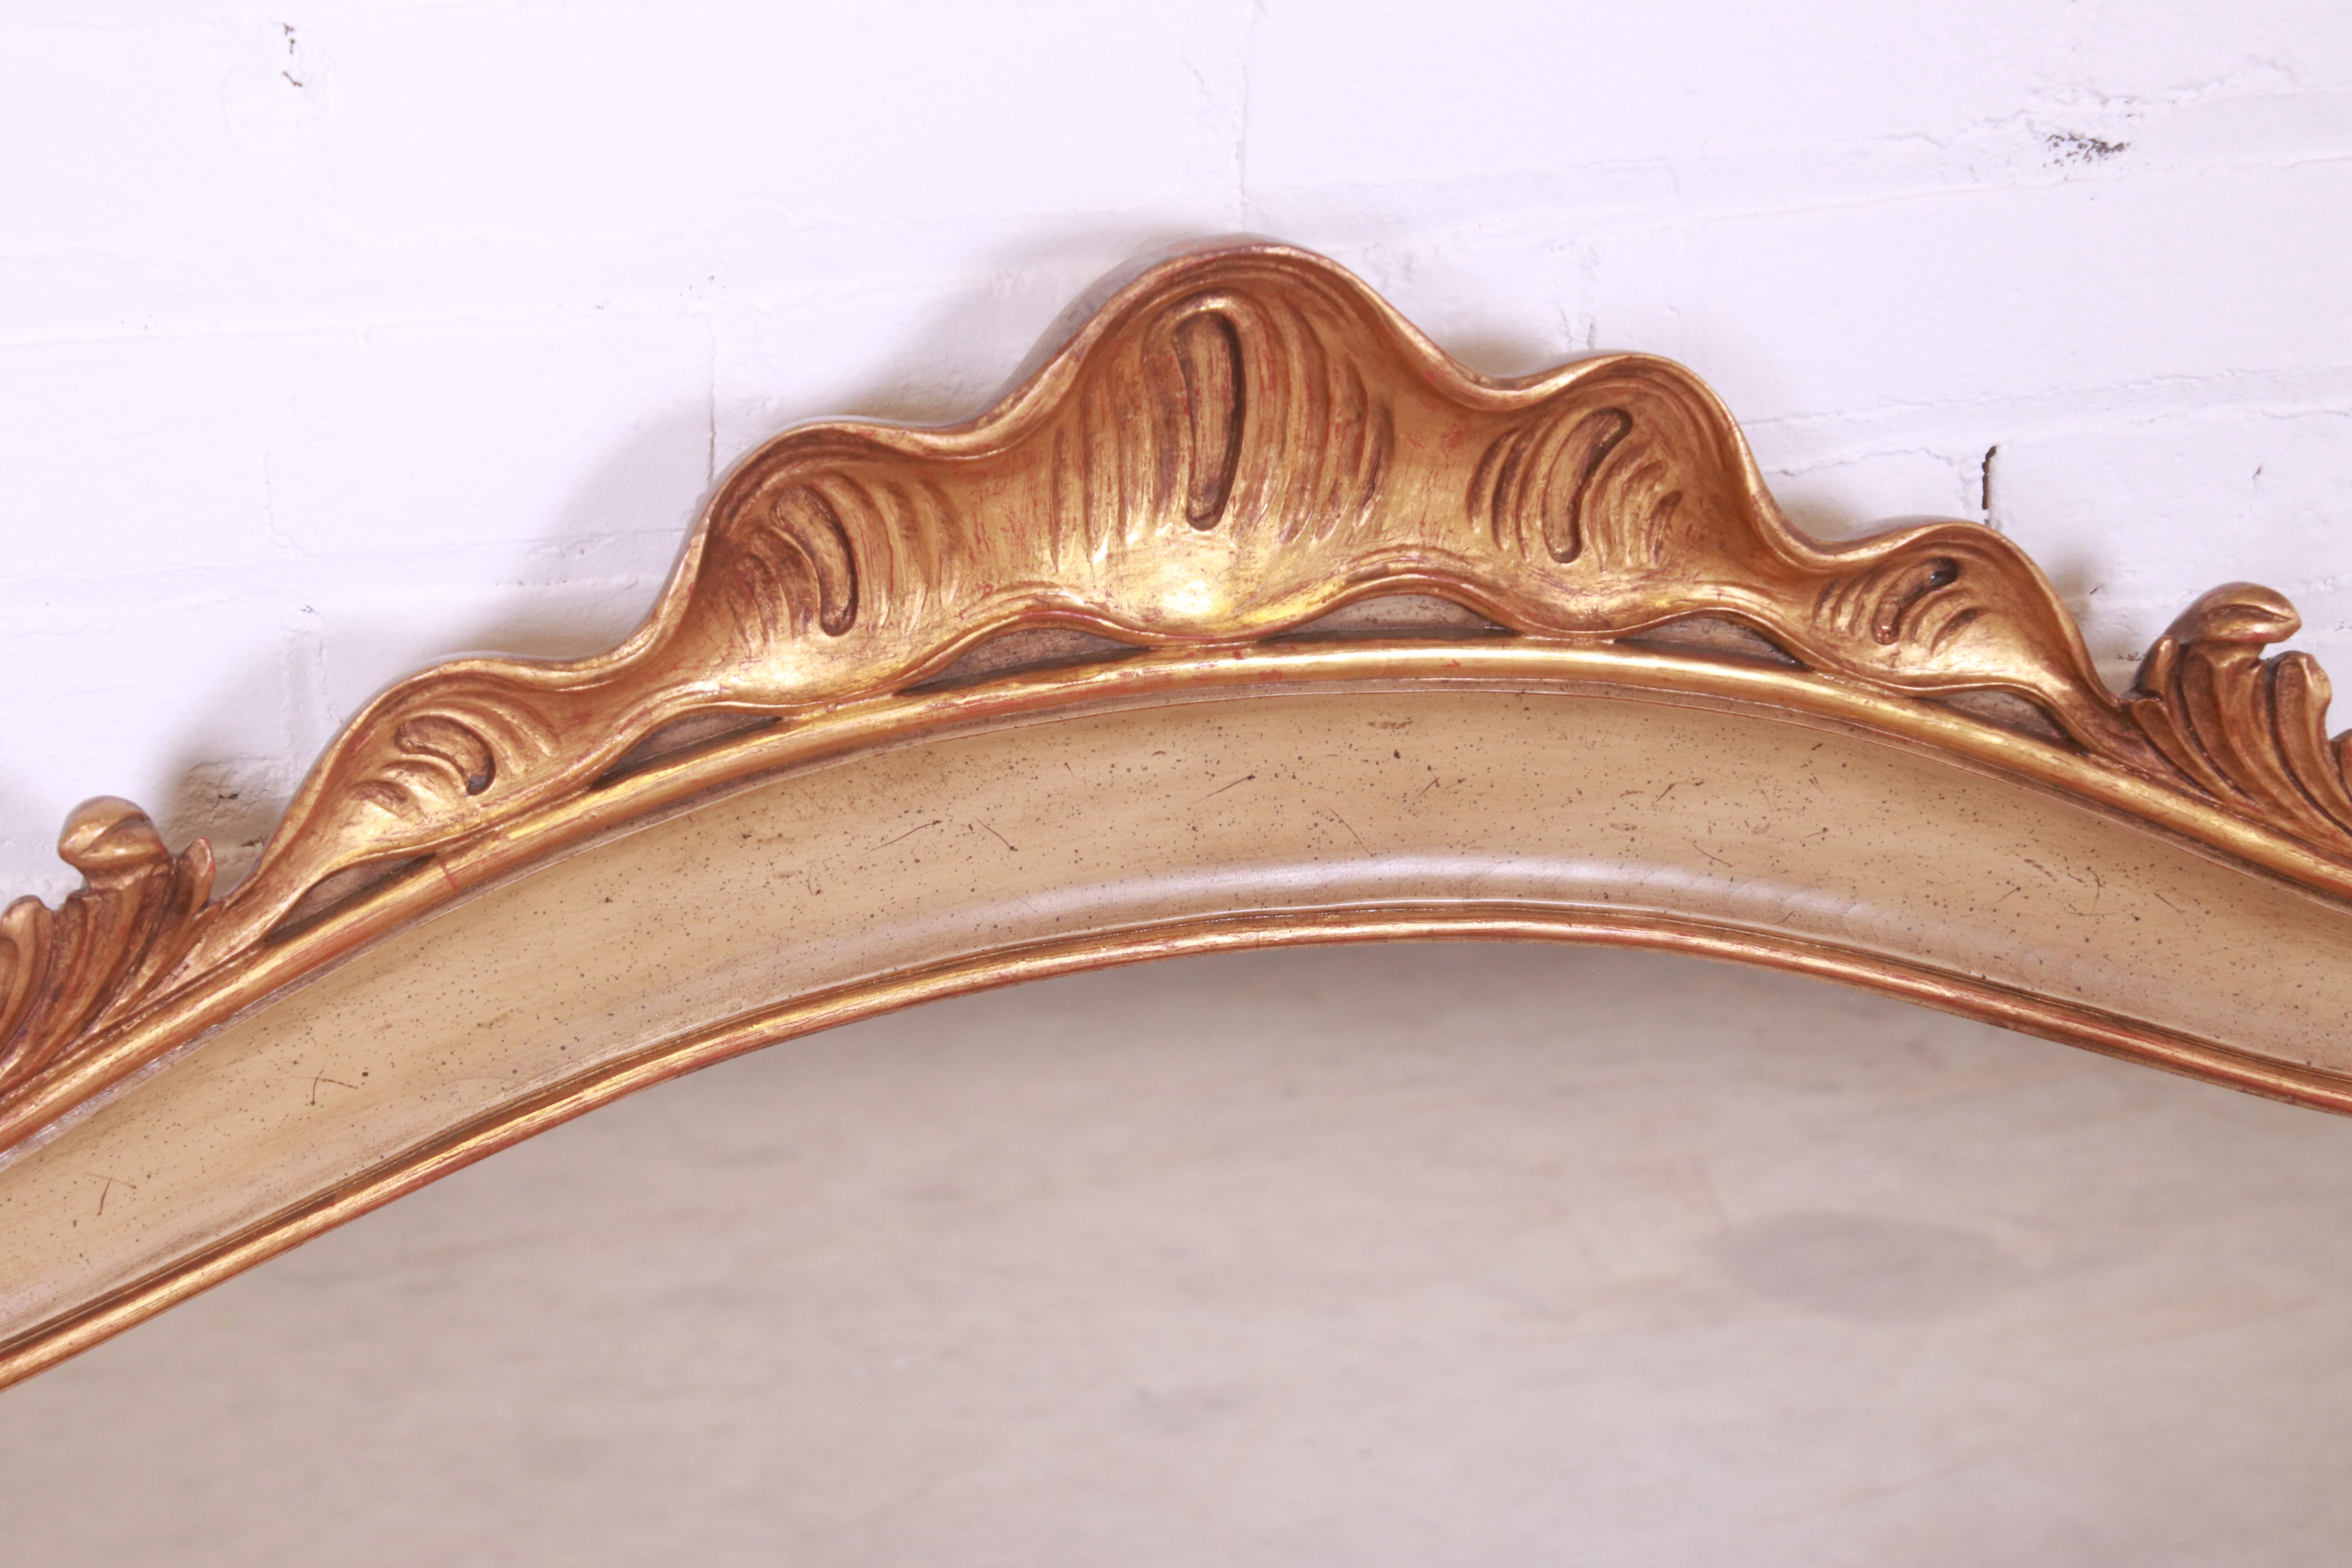 20th Century John Widdicomb French Rococo Gold Gilt and Painted Large Wall Mirror, 1940s For Sale